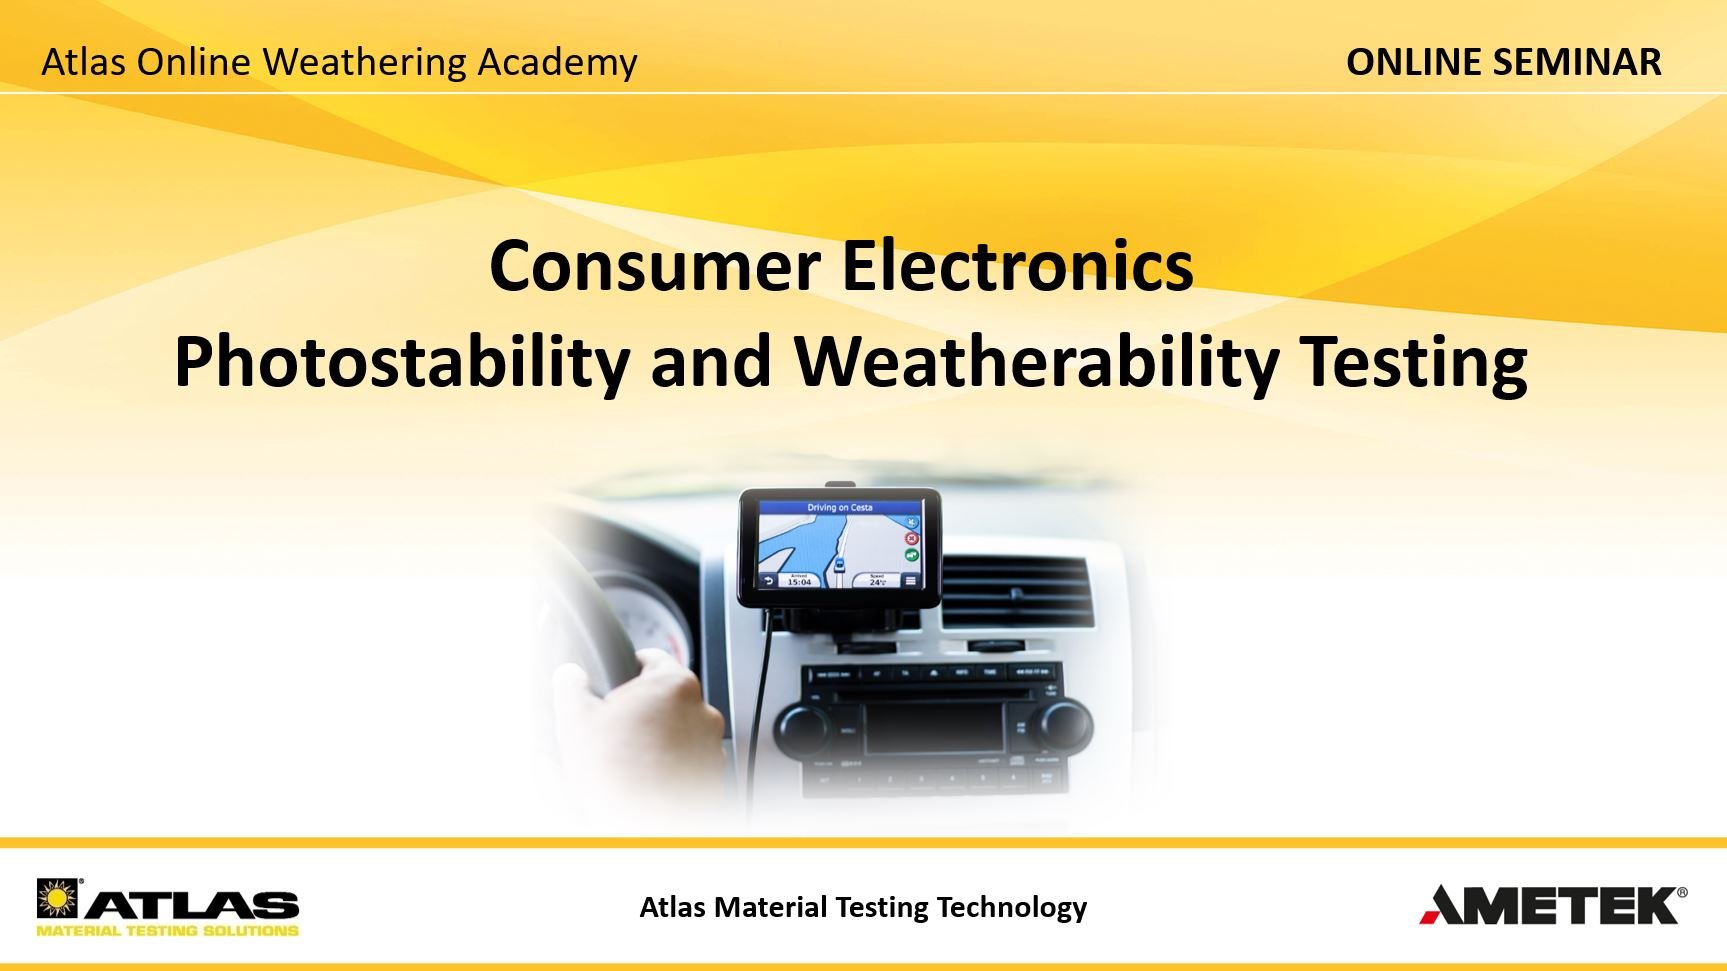 16-9 Online Seminar-Cover-Consumer-Electronics-Photostability-and-weathering-testing AR-2022-08-10